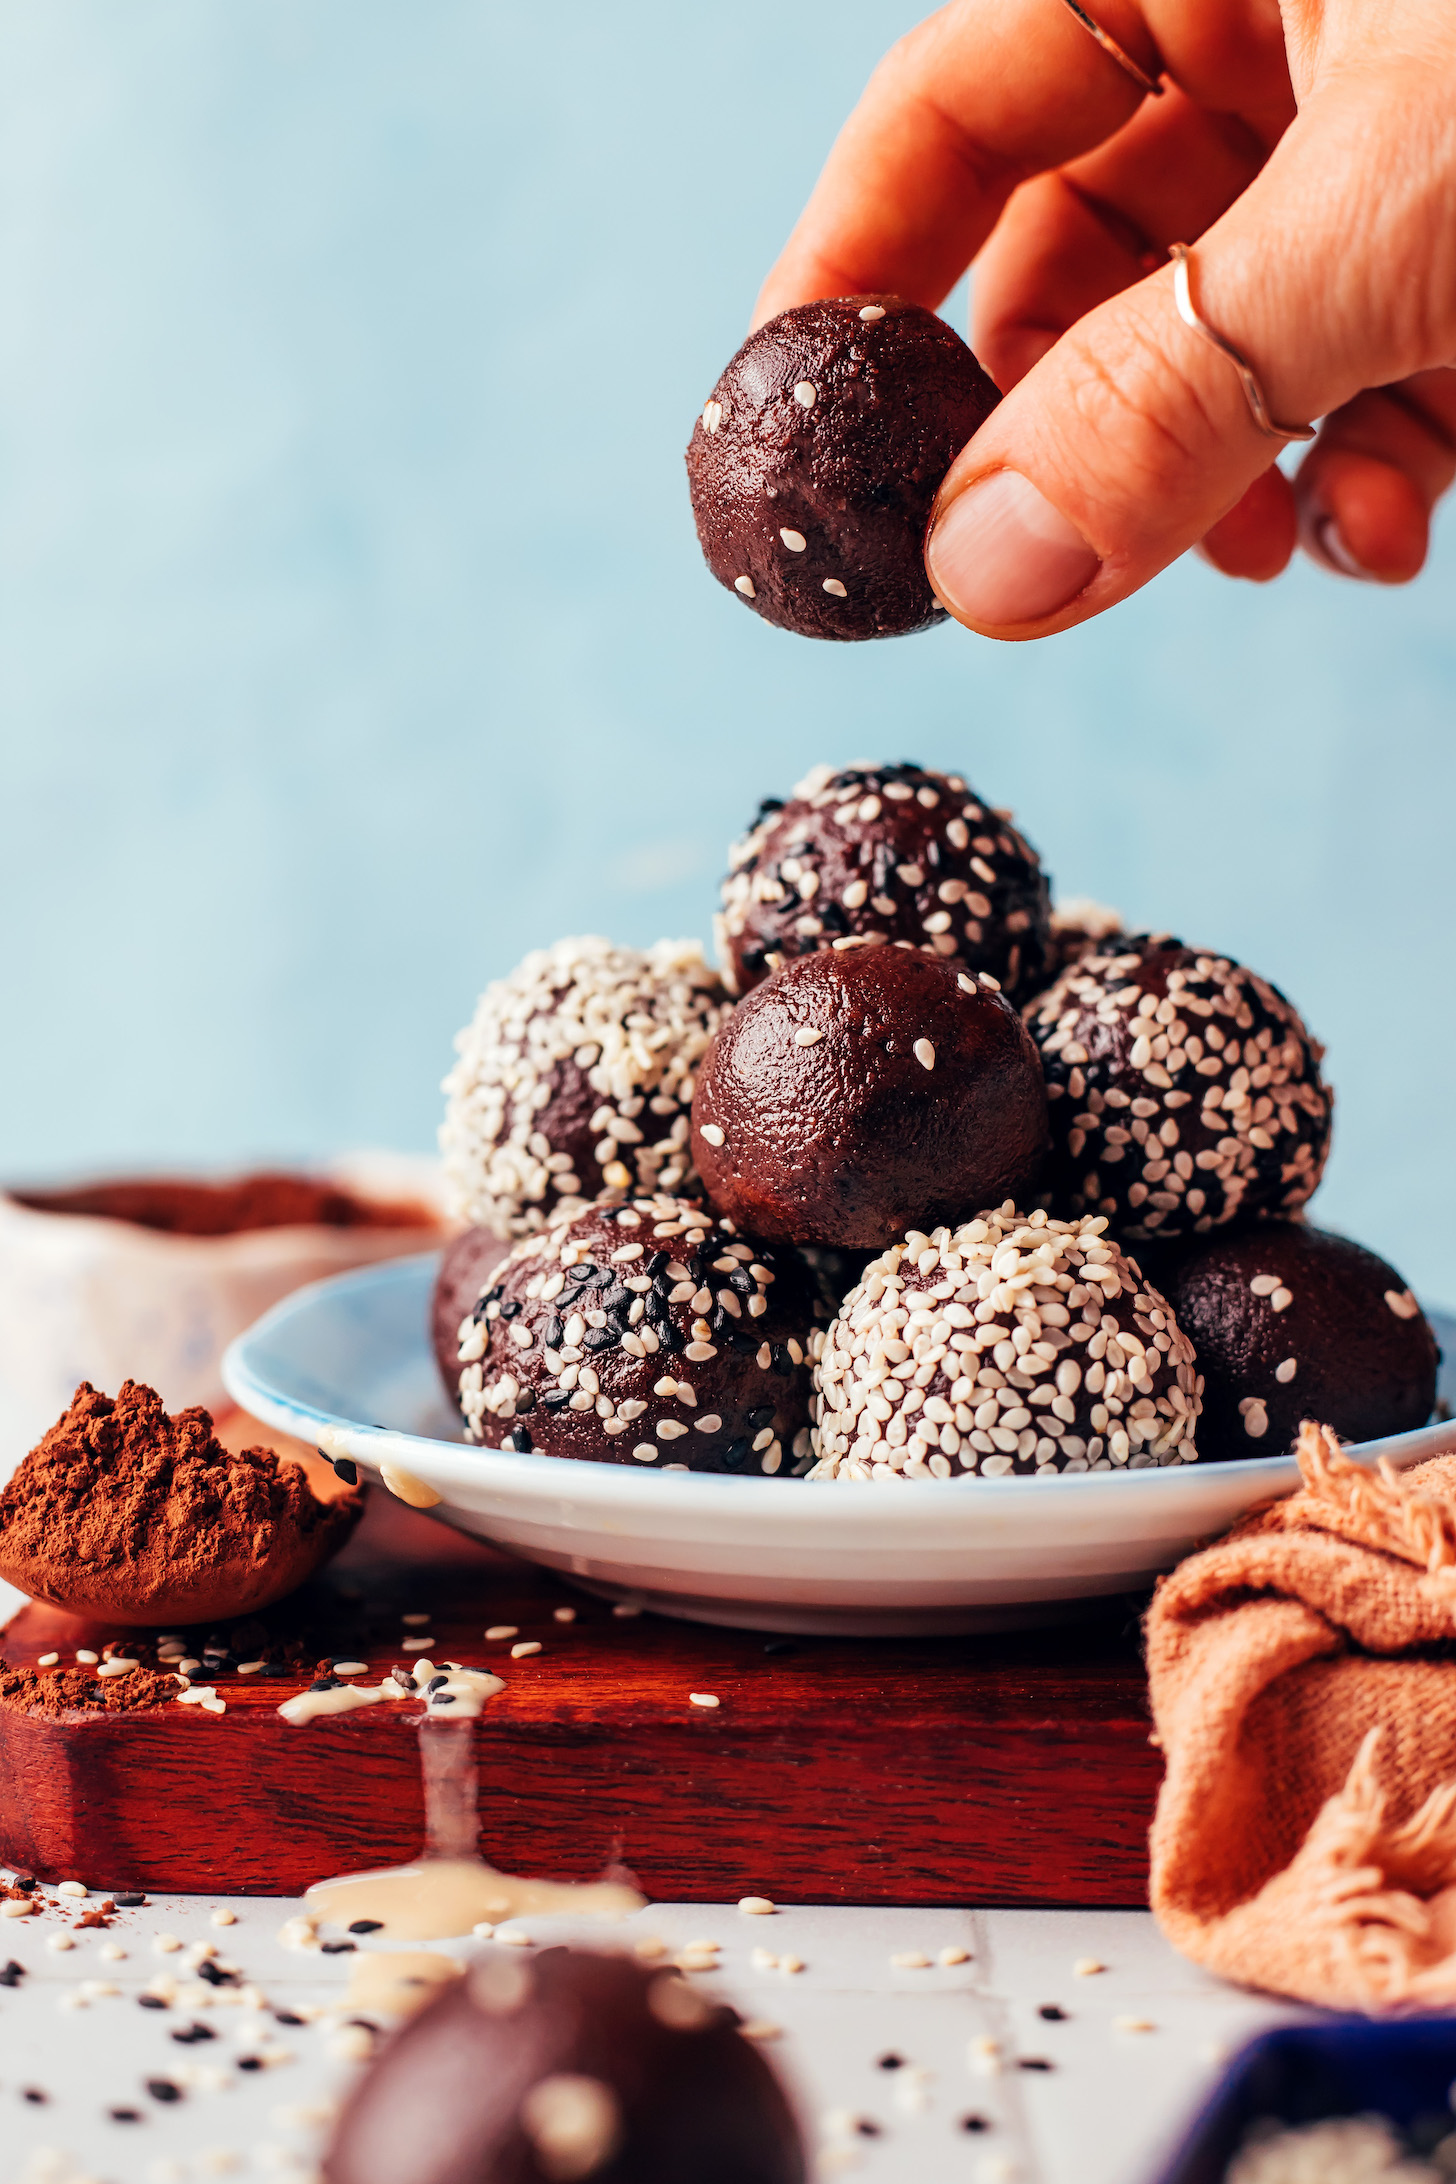 Picking up a vegan chocolate tahini truffle from a plate with a stack of truffles